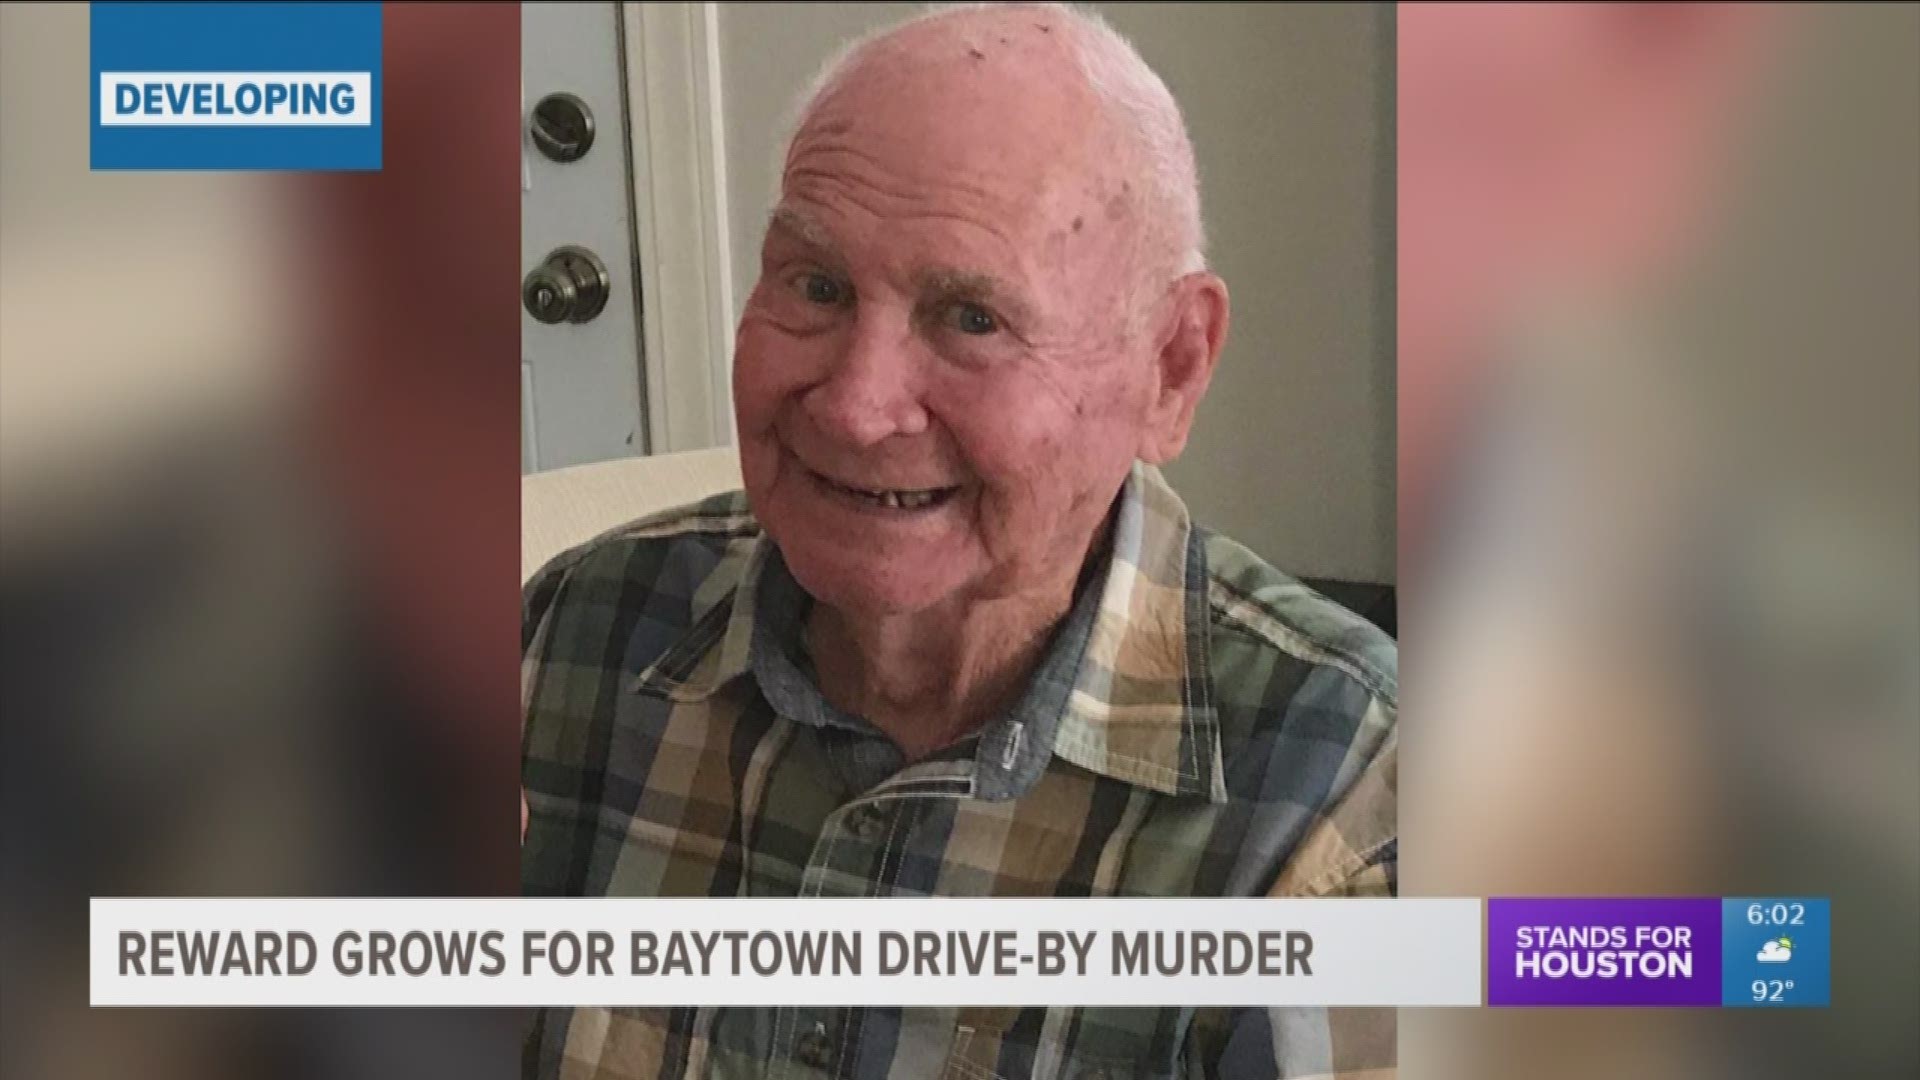 Family and friends are desperate to find justice for an 82-year-old man shot down during his early morning walk have raised money on their own to add to a Crime Stoppers reward.